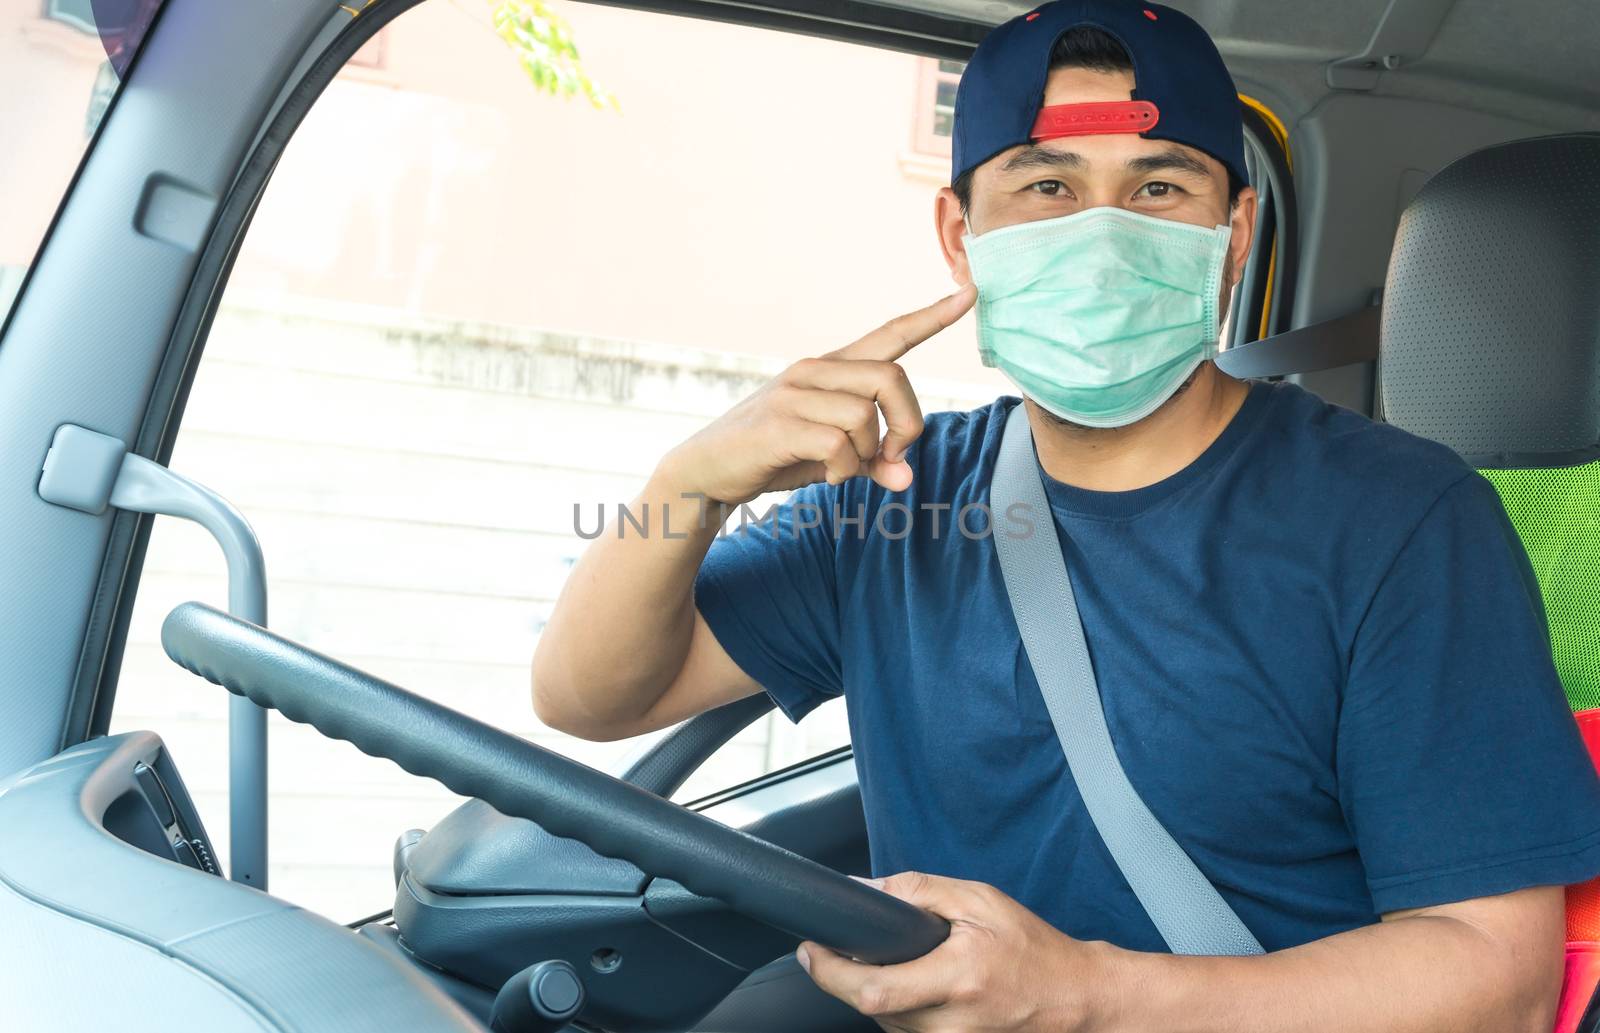 Truck driver wearing a mask by nuad338